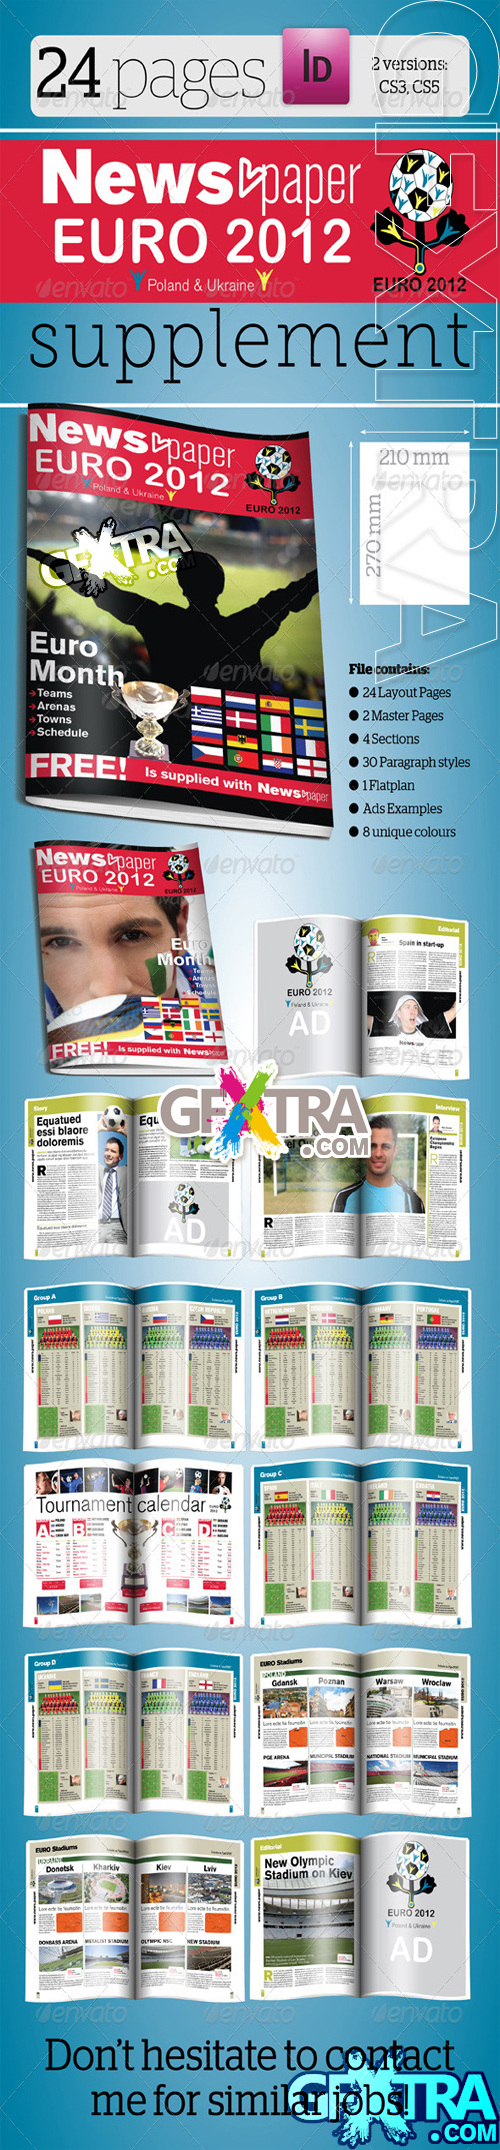 GraphicRiver - 24 Pages Euro 2012 Supplement For News.paper